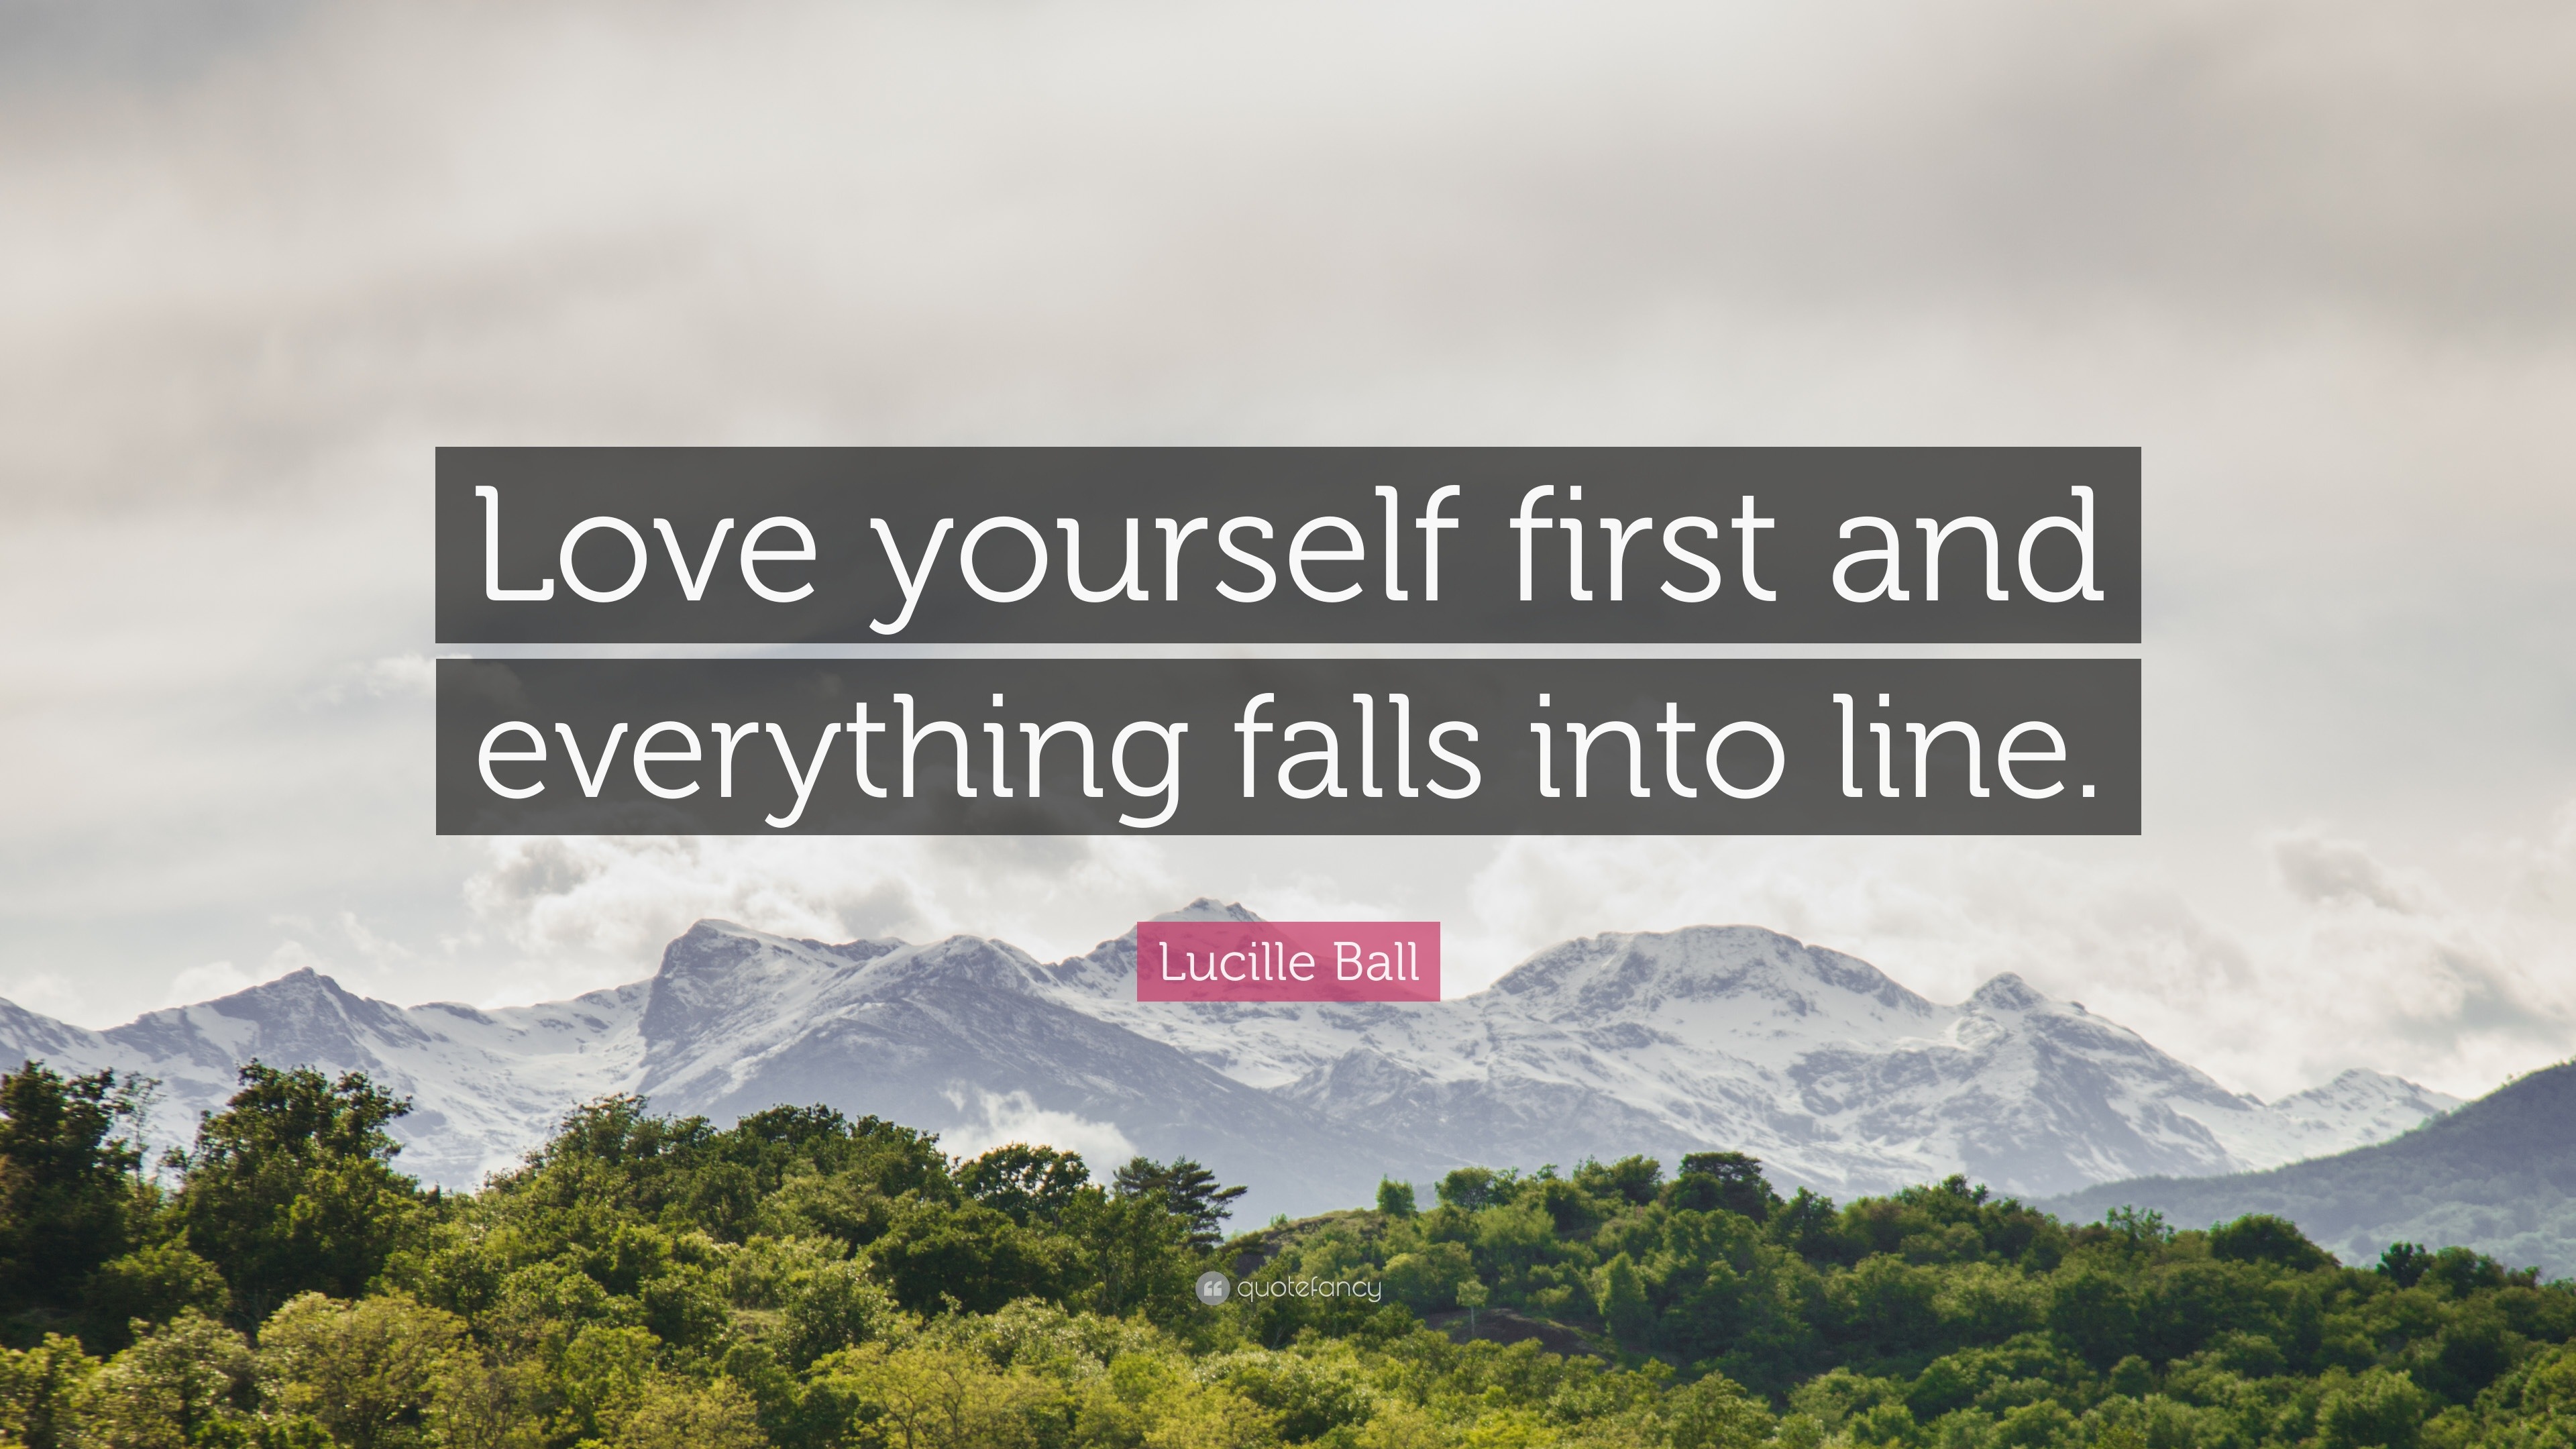 Lucille Ball Quote Love Yourself First And Everything Falls Into Line